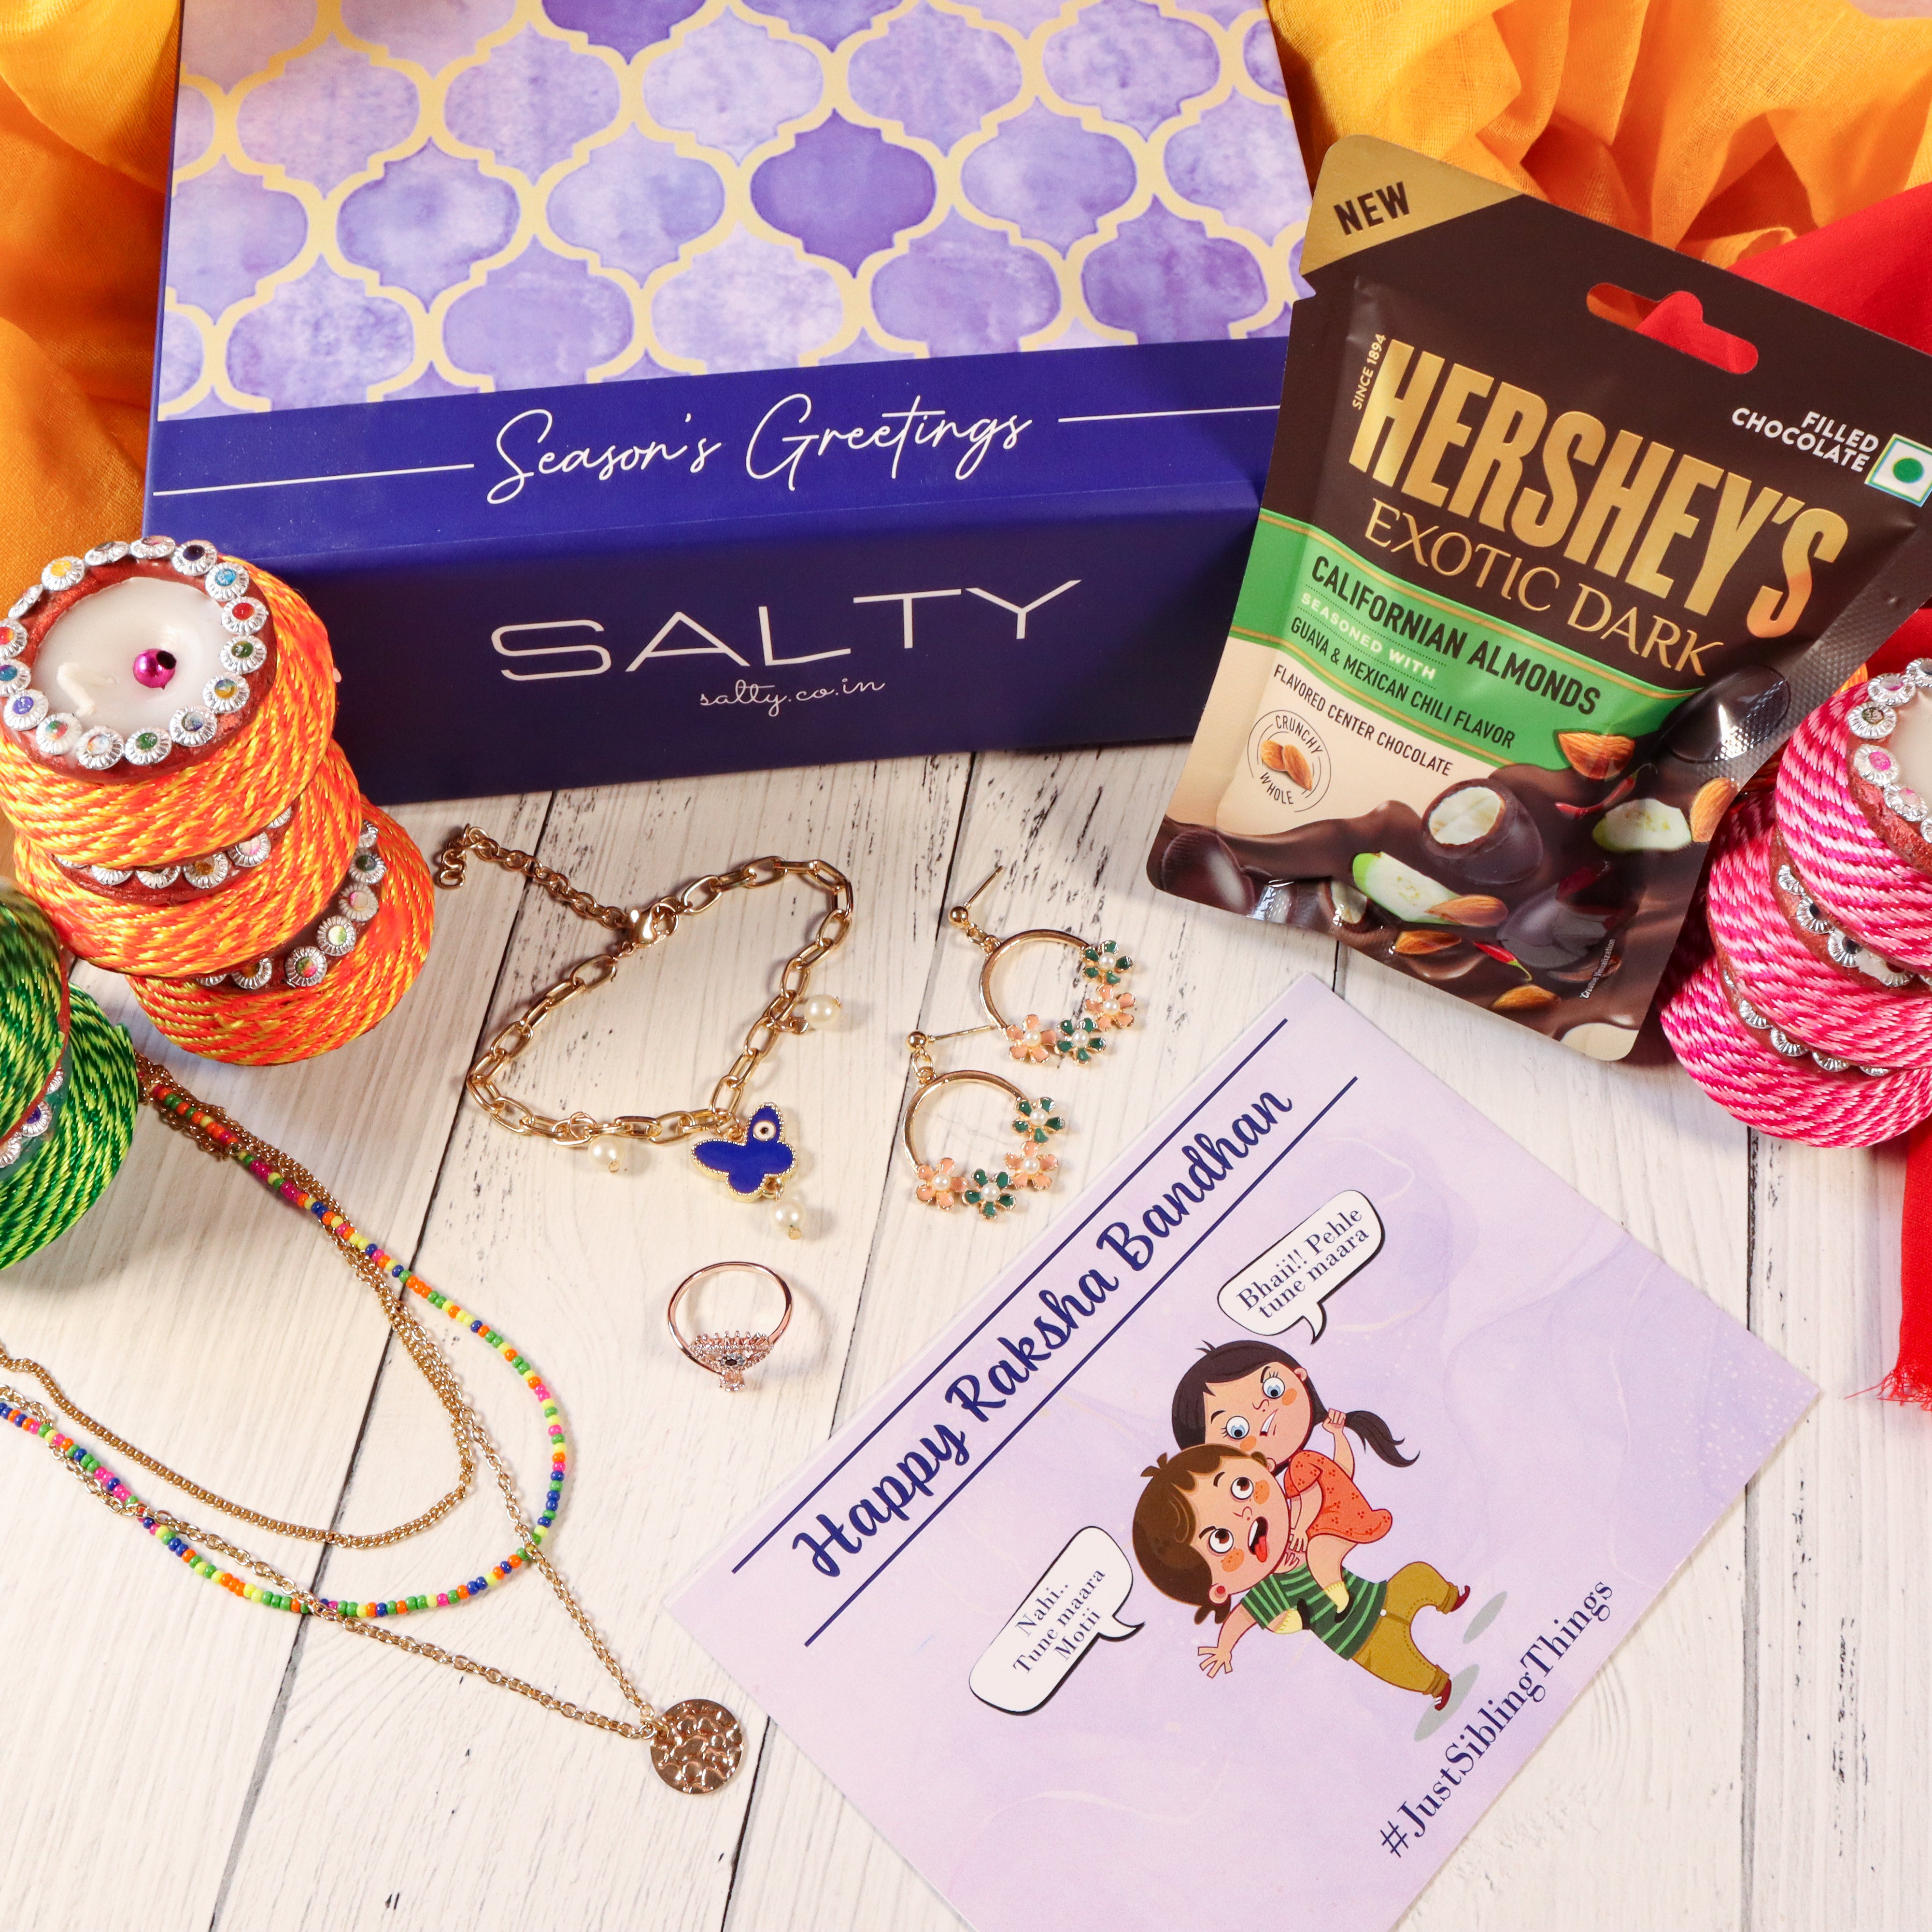 How to Choose an Ultimate Rakhi Gift for your Sister